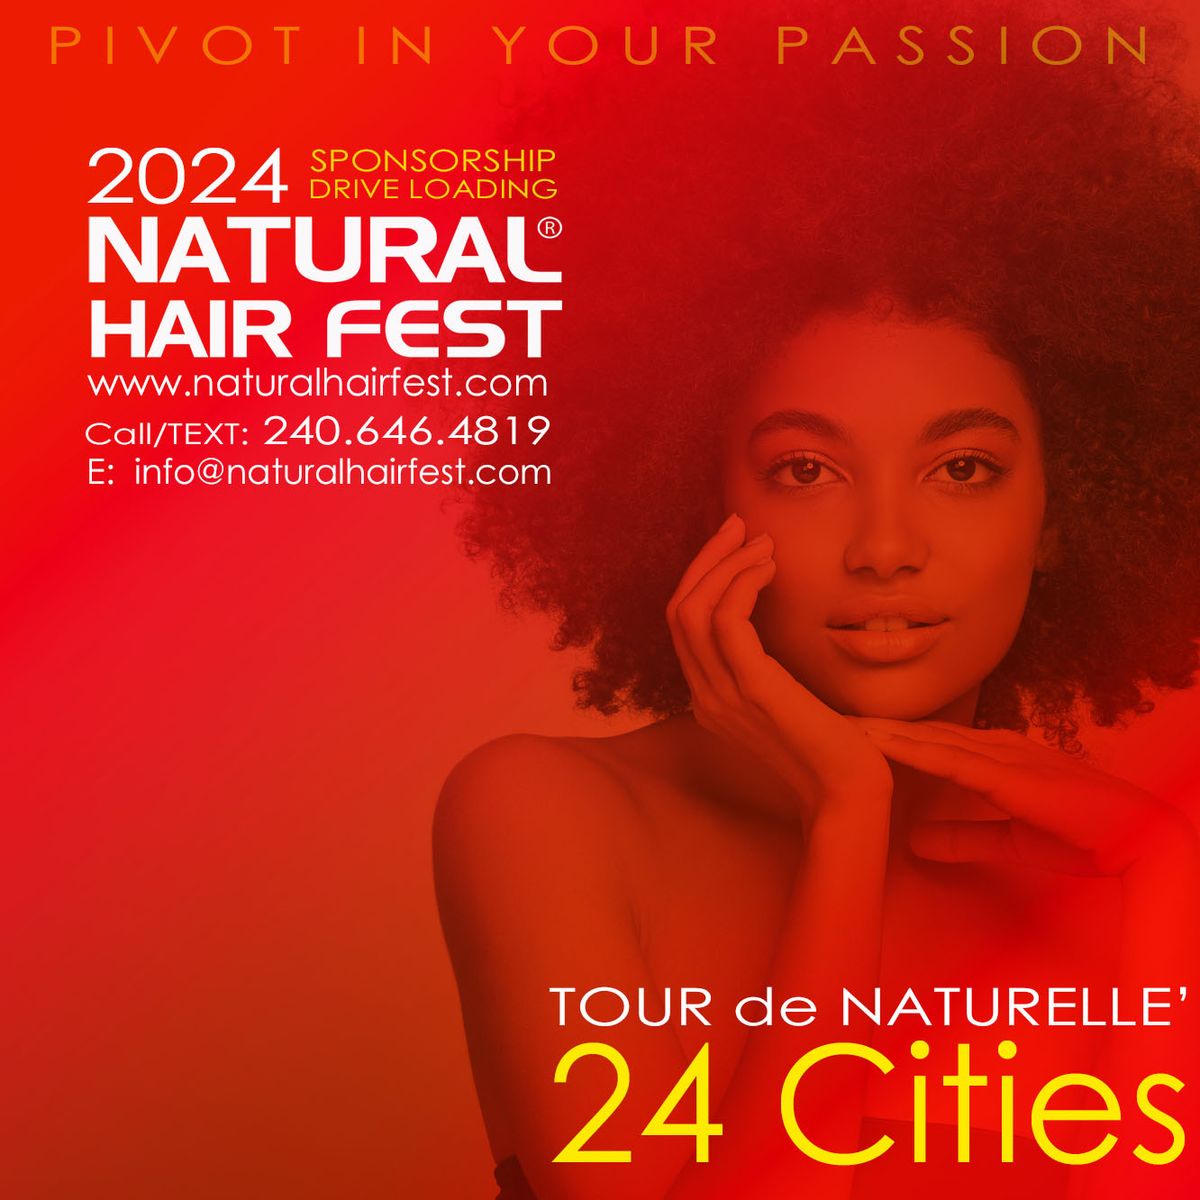 NATURAL HAIR FEST CHICAGO MAIN EVENT DAY 2